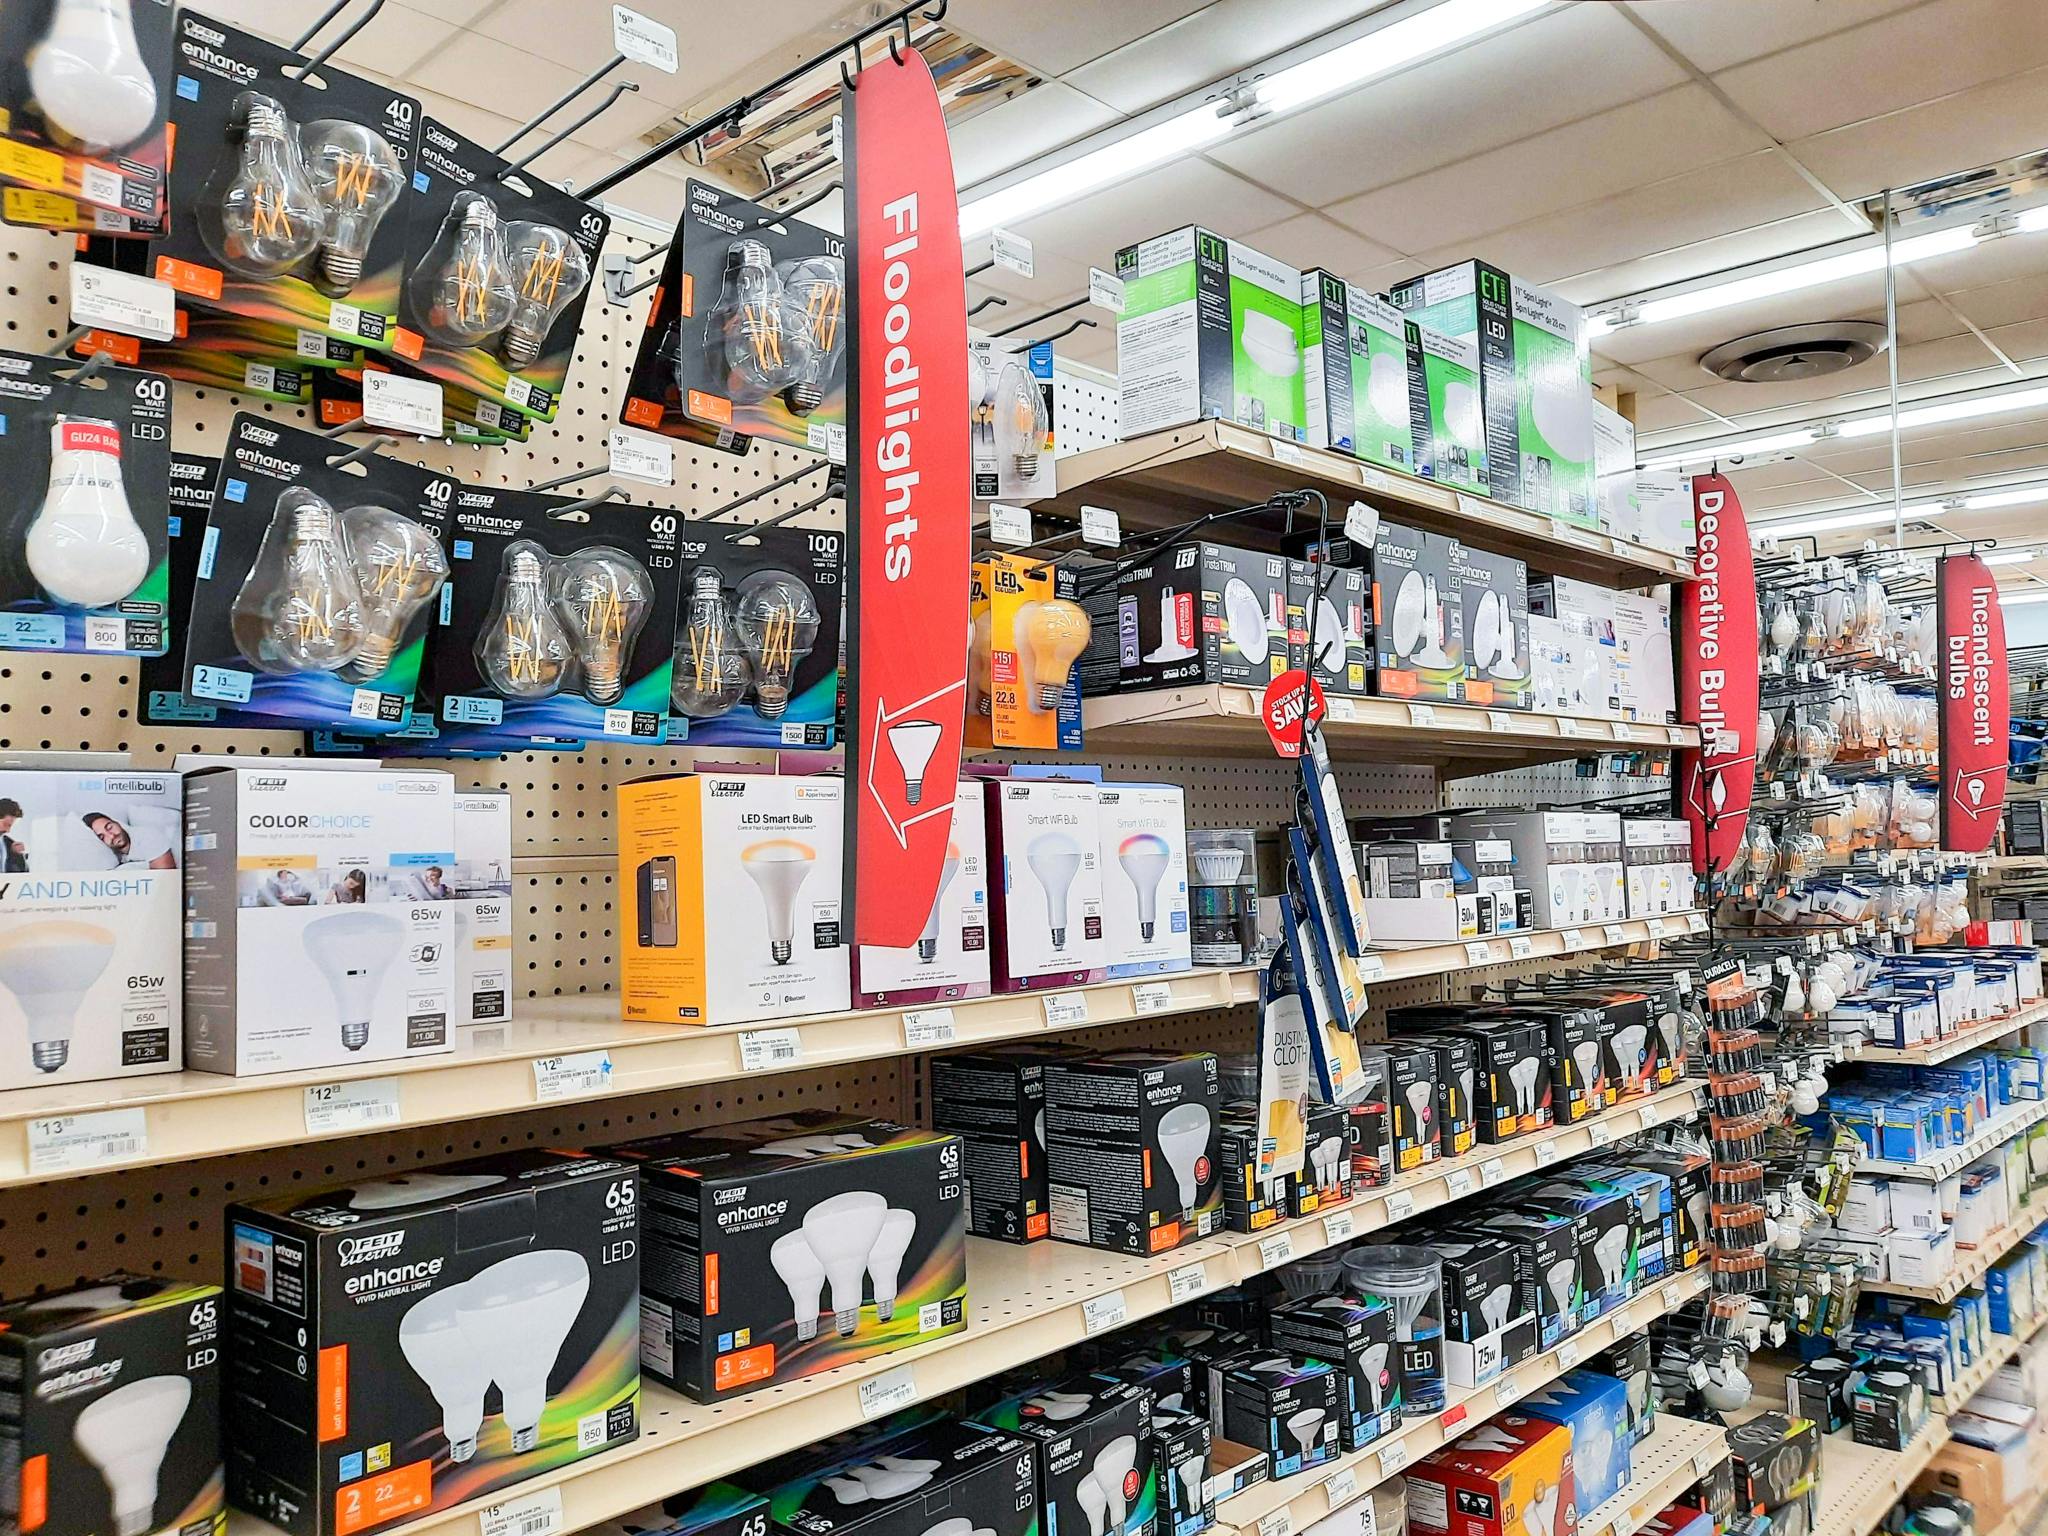 Light bulb products on display at Ace Hardware